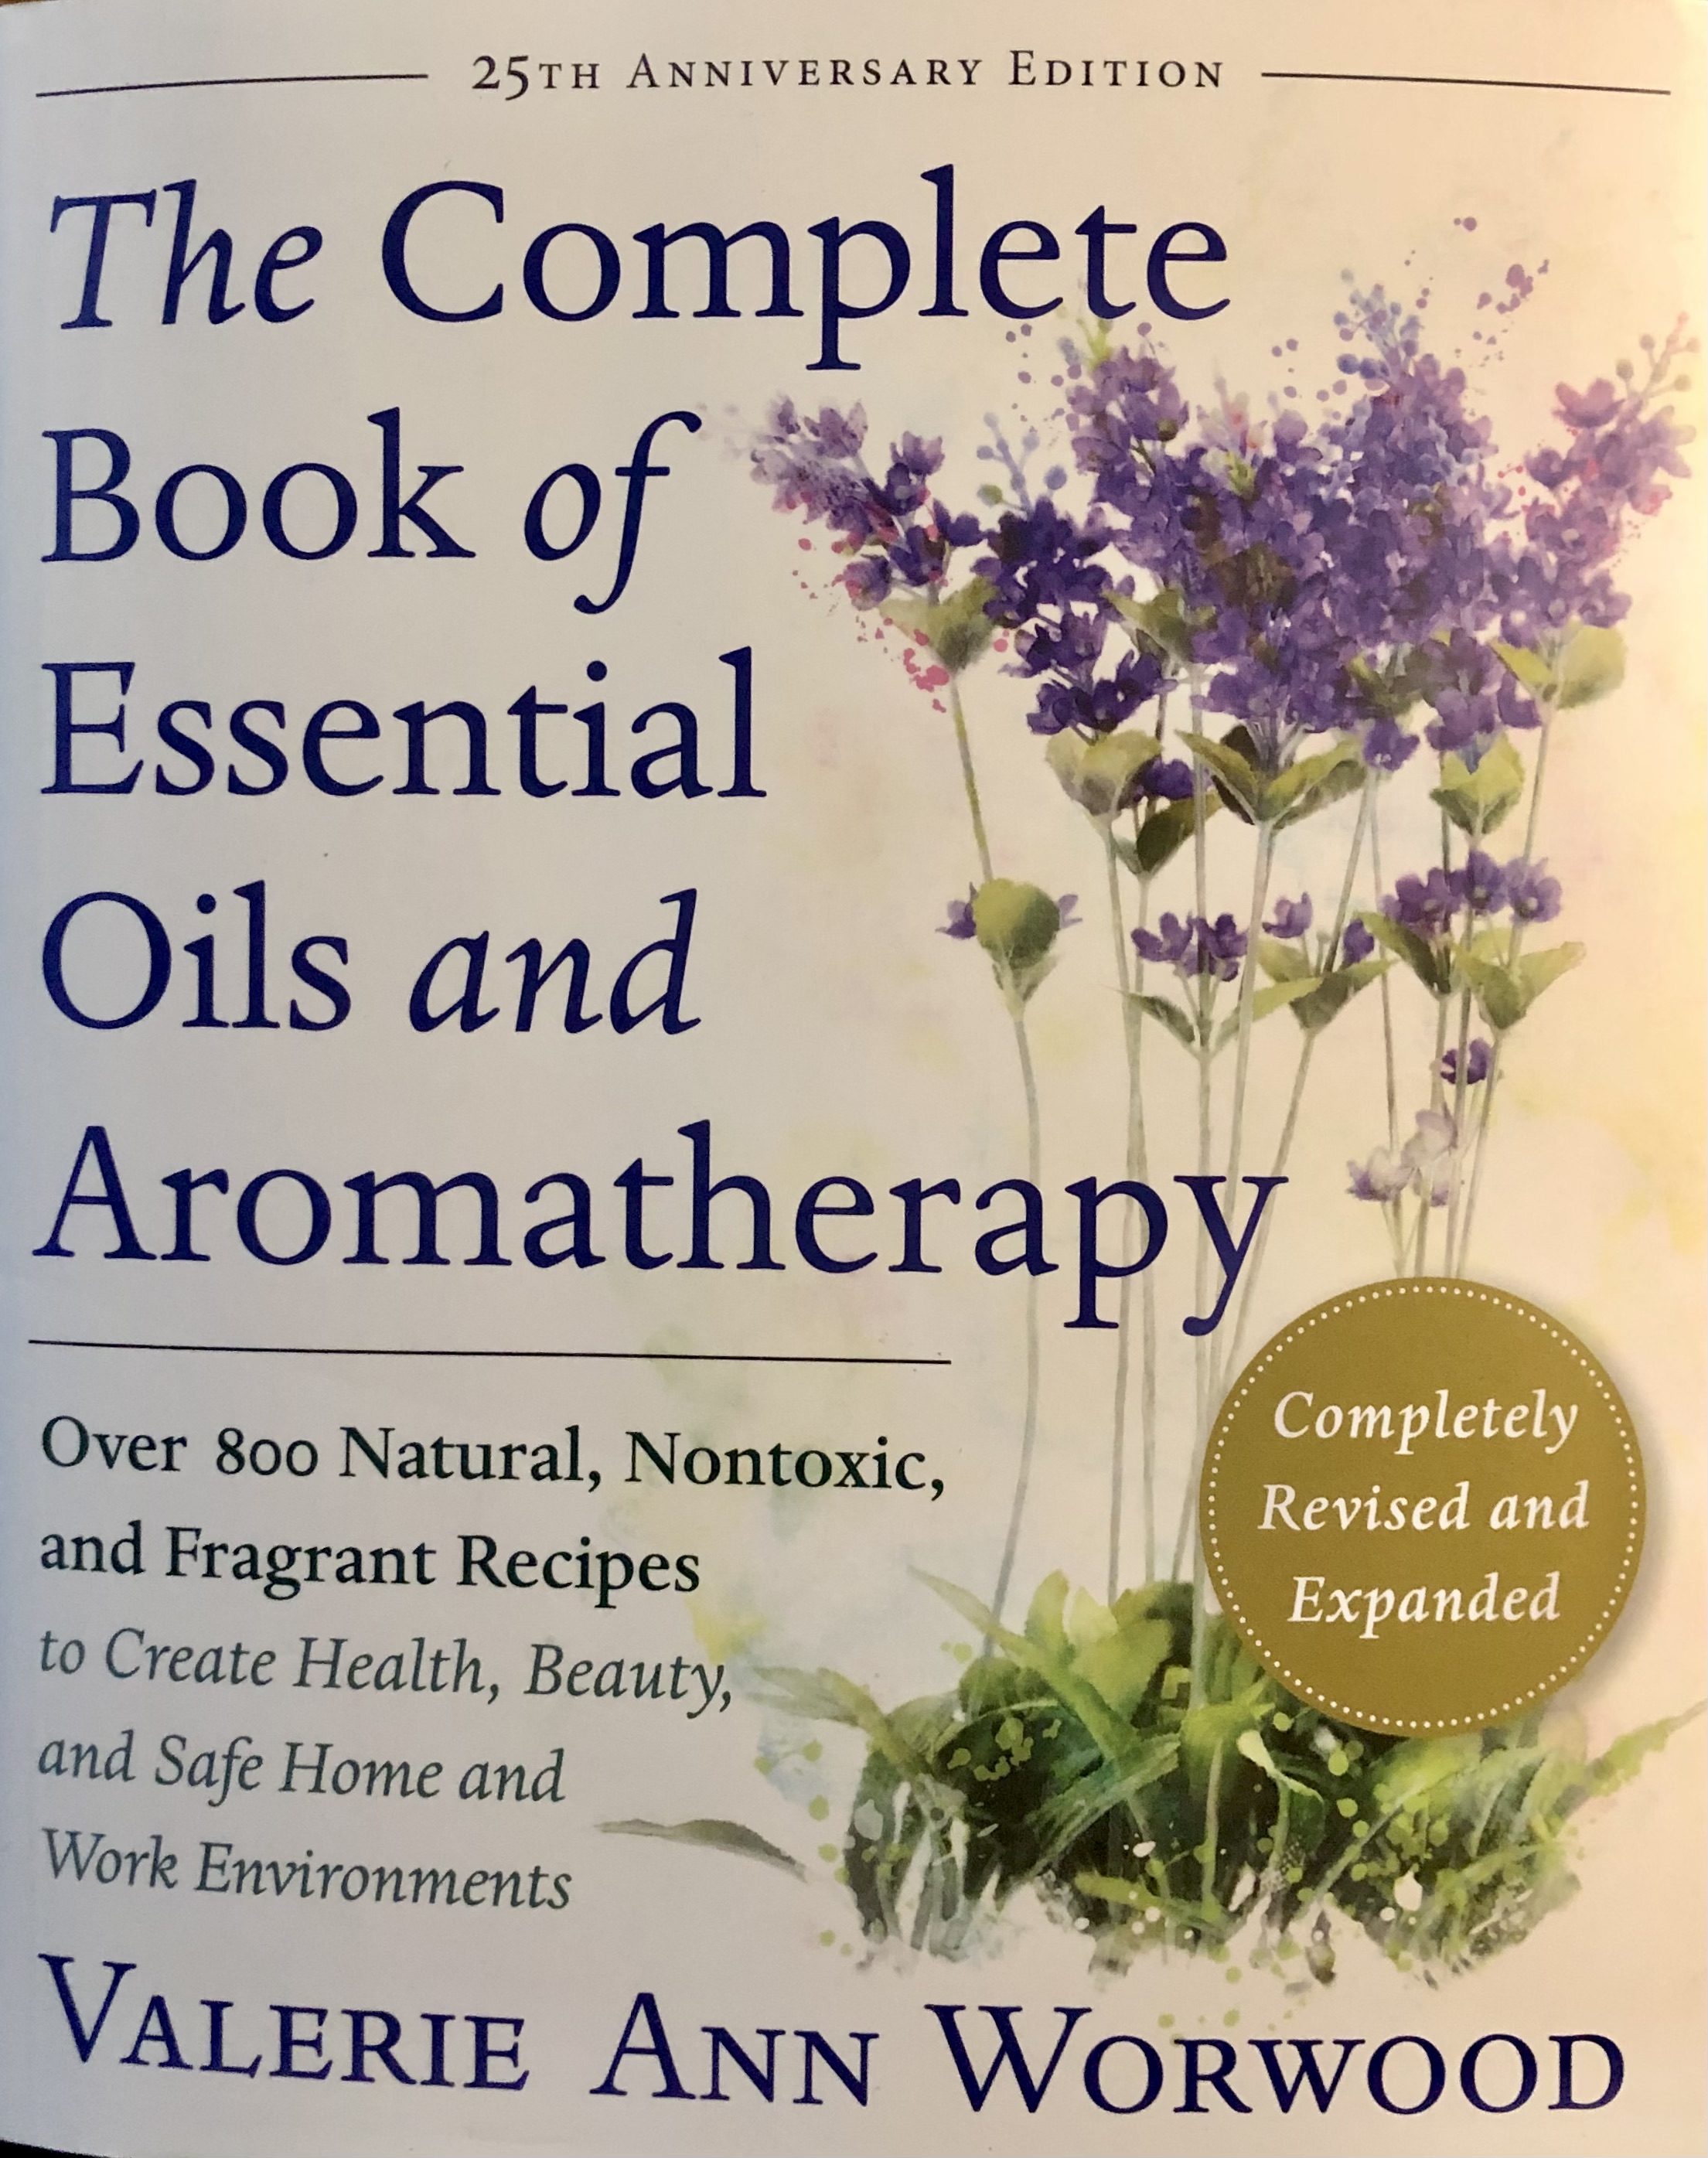 The Complete Book of Essential Oils and Aromatherapy, Revised and Expanded:  Over 800 Natural, Nontoxic, and Fragrant Recipes to Create Health, Beauty